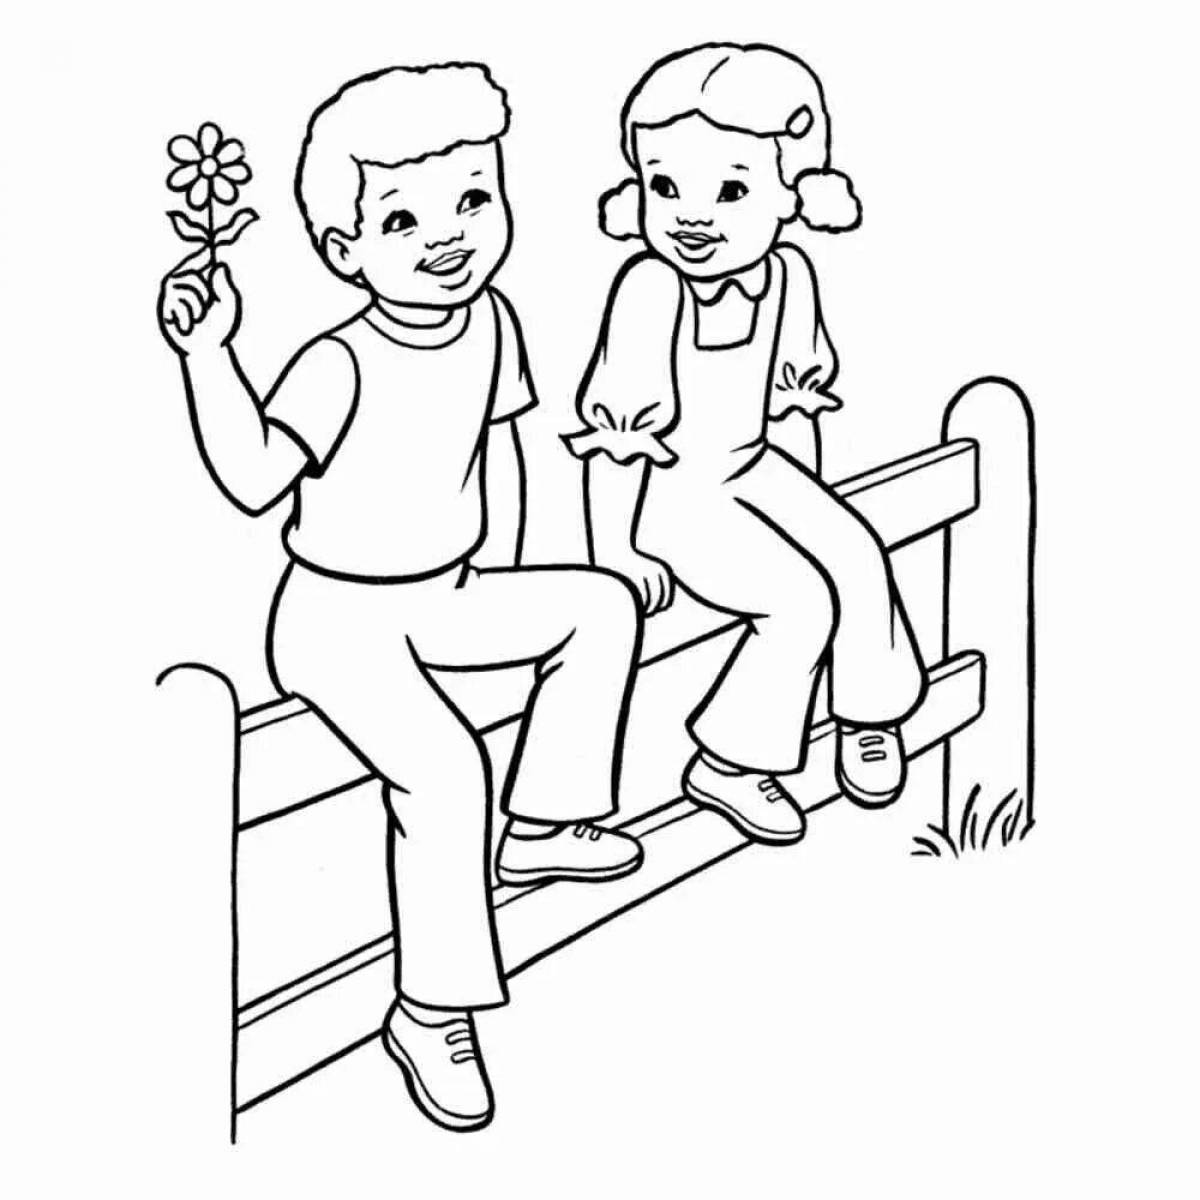 Let's playful coloring page